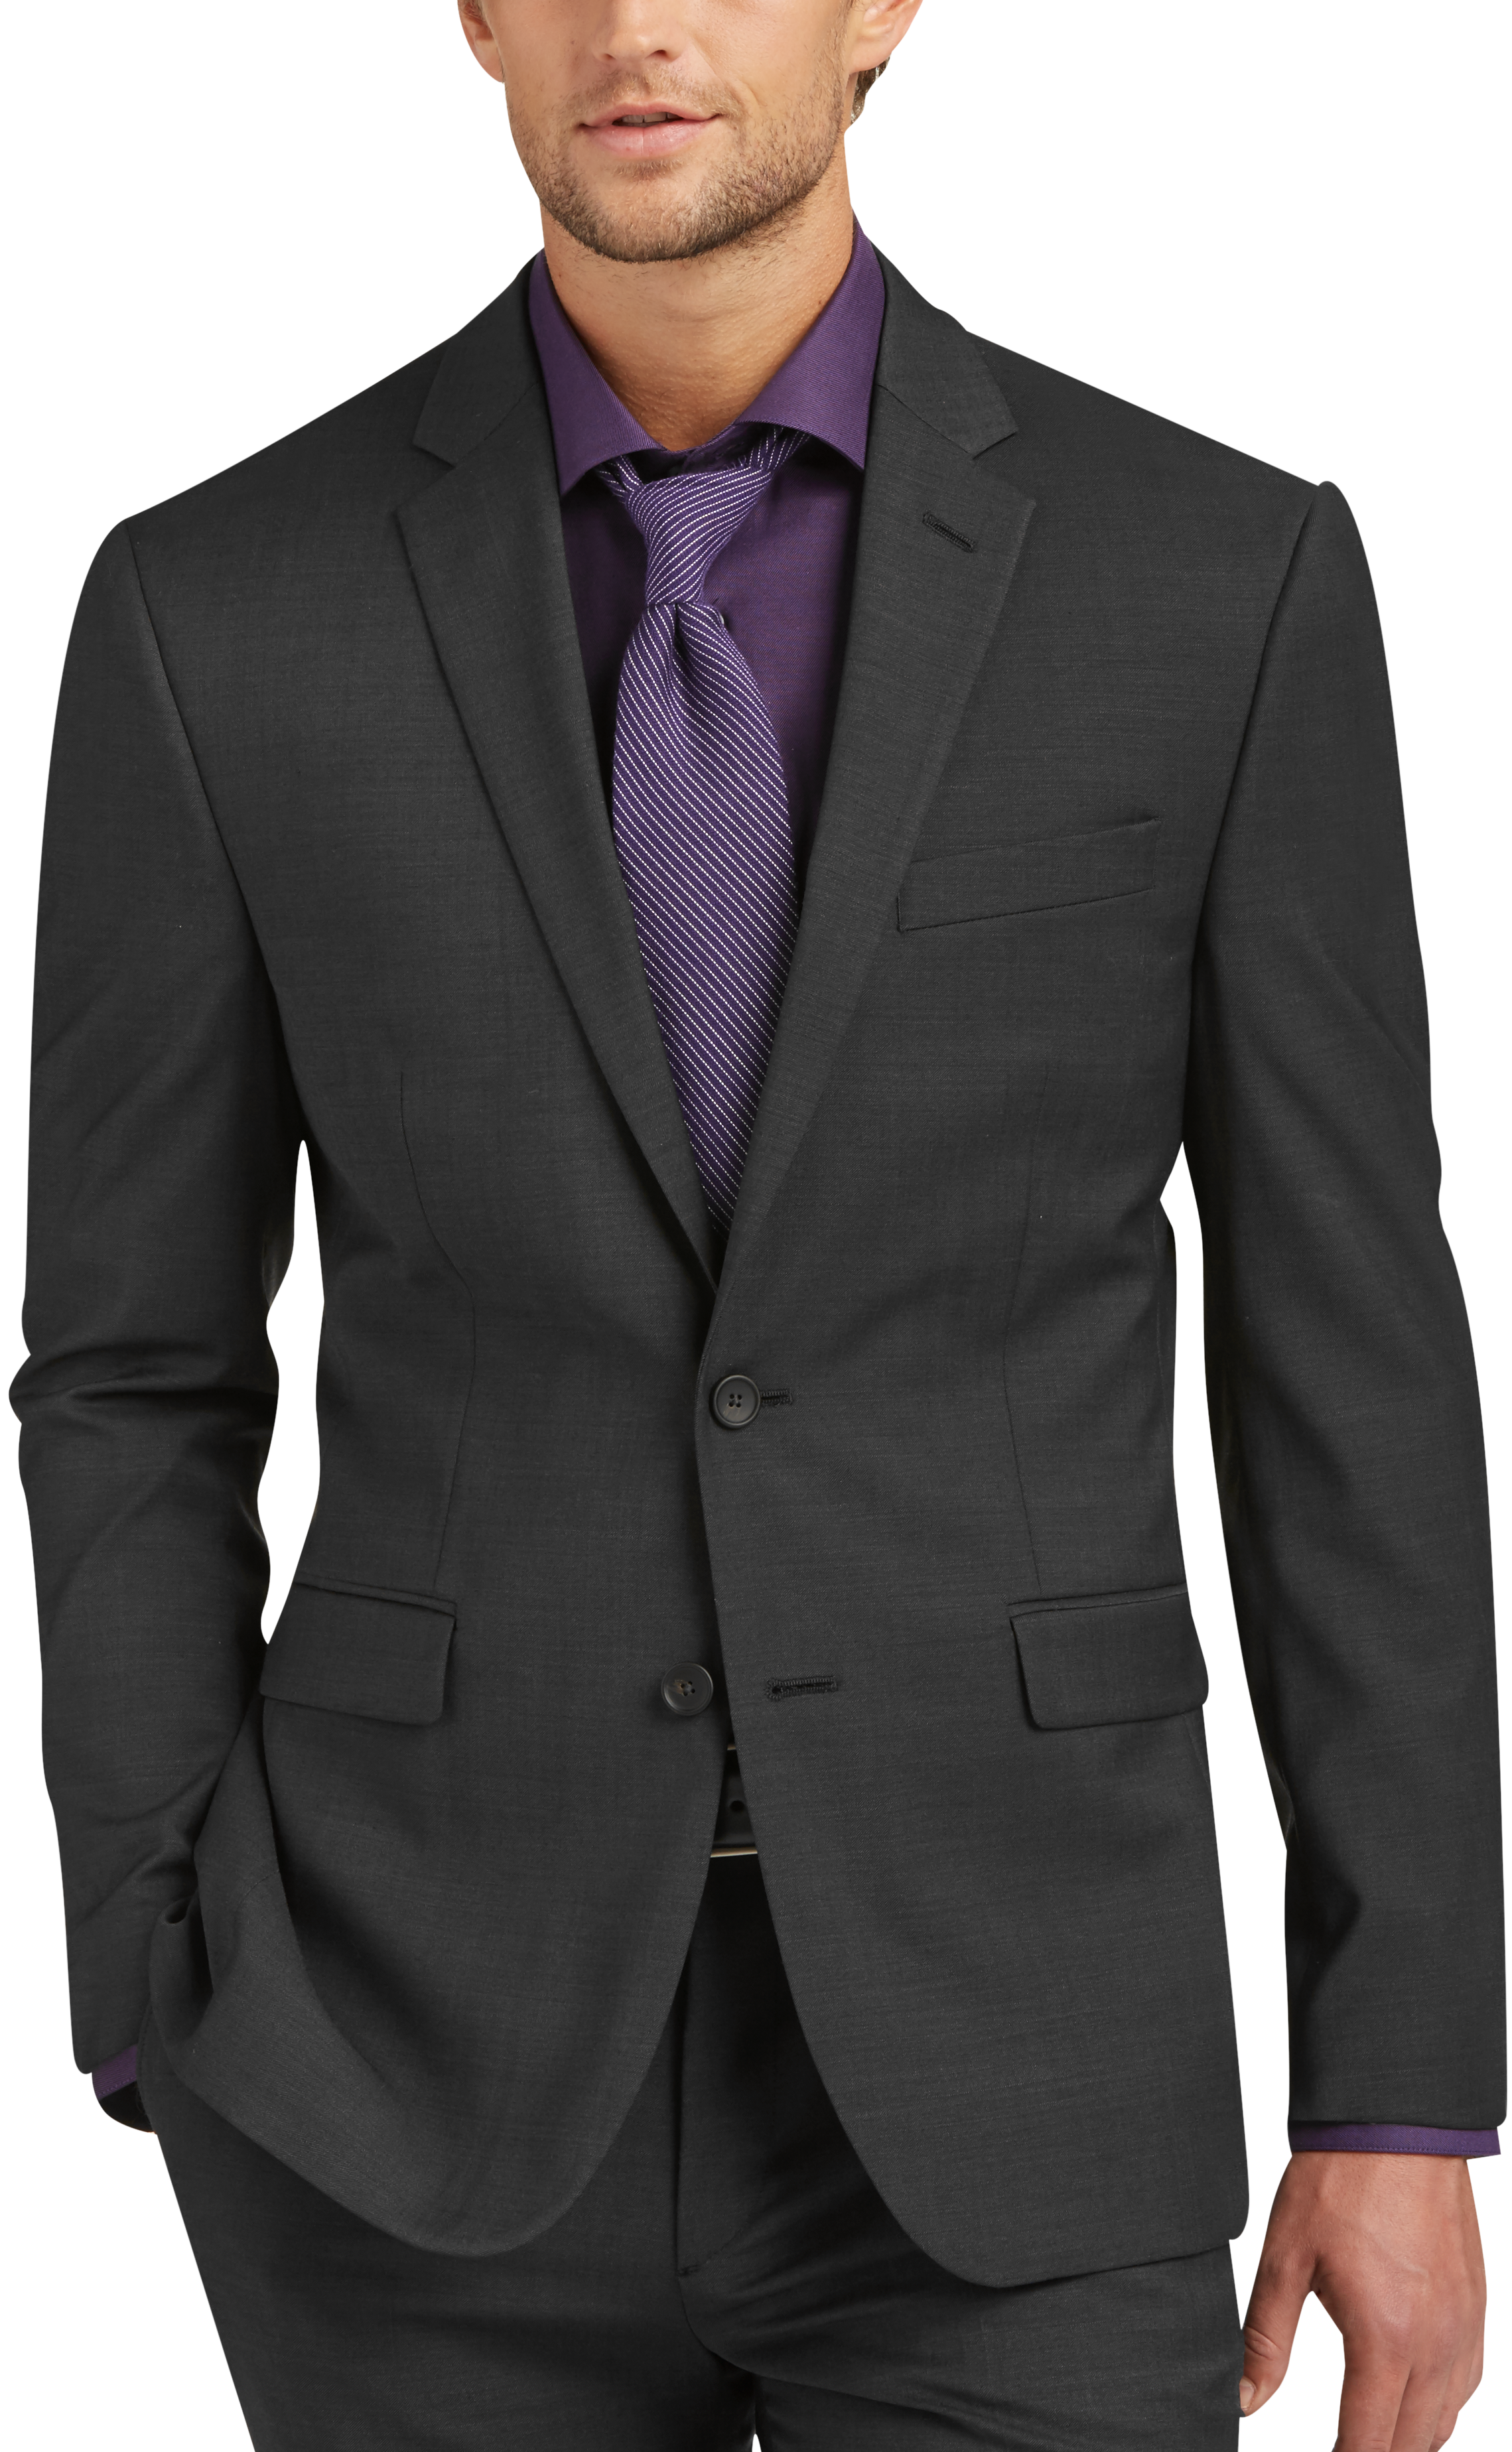 Mens Suits - Awearness Kenneth Cole AWEAR-TECH Slim Fit Suit Separates Coat, Charcoal - Men's Wearhouse